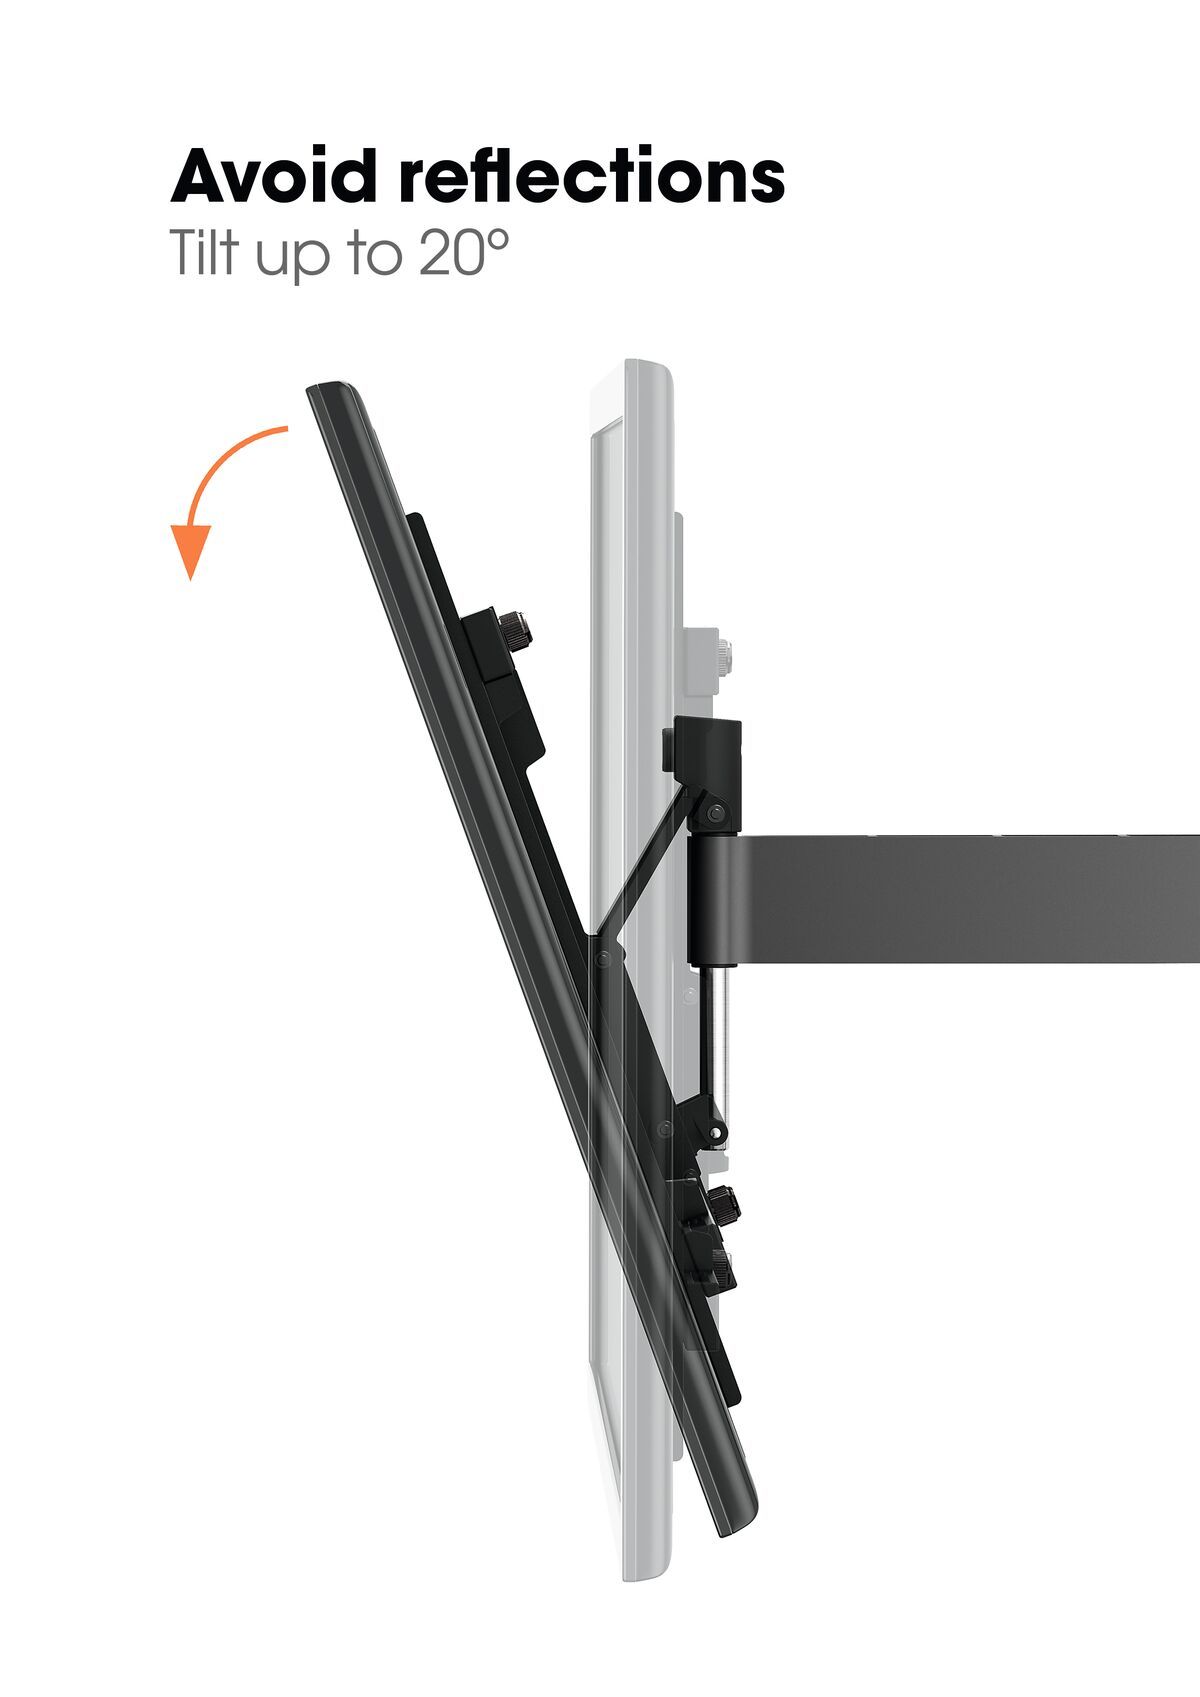 Vogel's WALL 3245 Full-Motion TV Wall Mount (black) - Suitable for 32 up to 55 inch TVs - Full motion (up to 180°) - Tilt up to 20° - USP